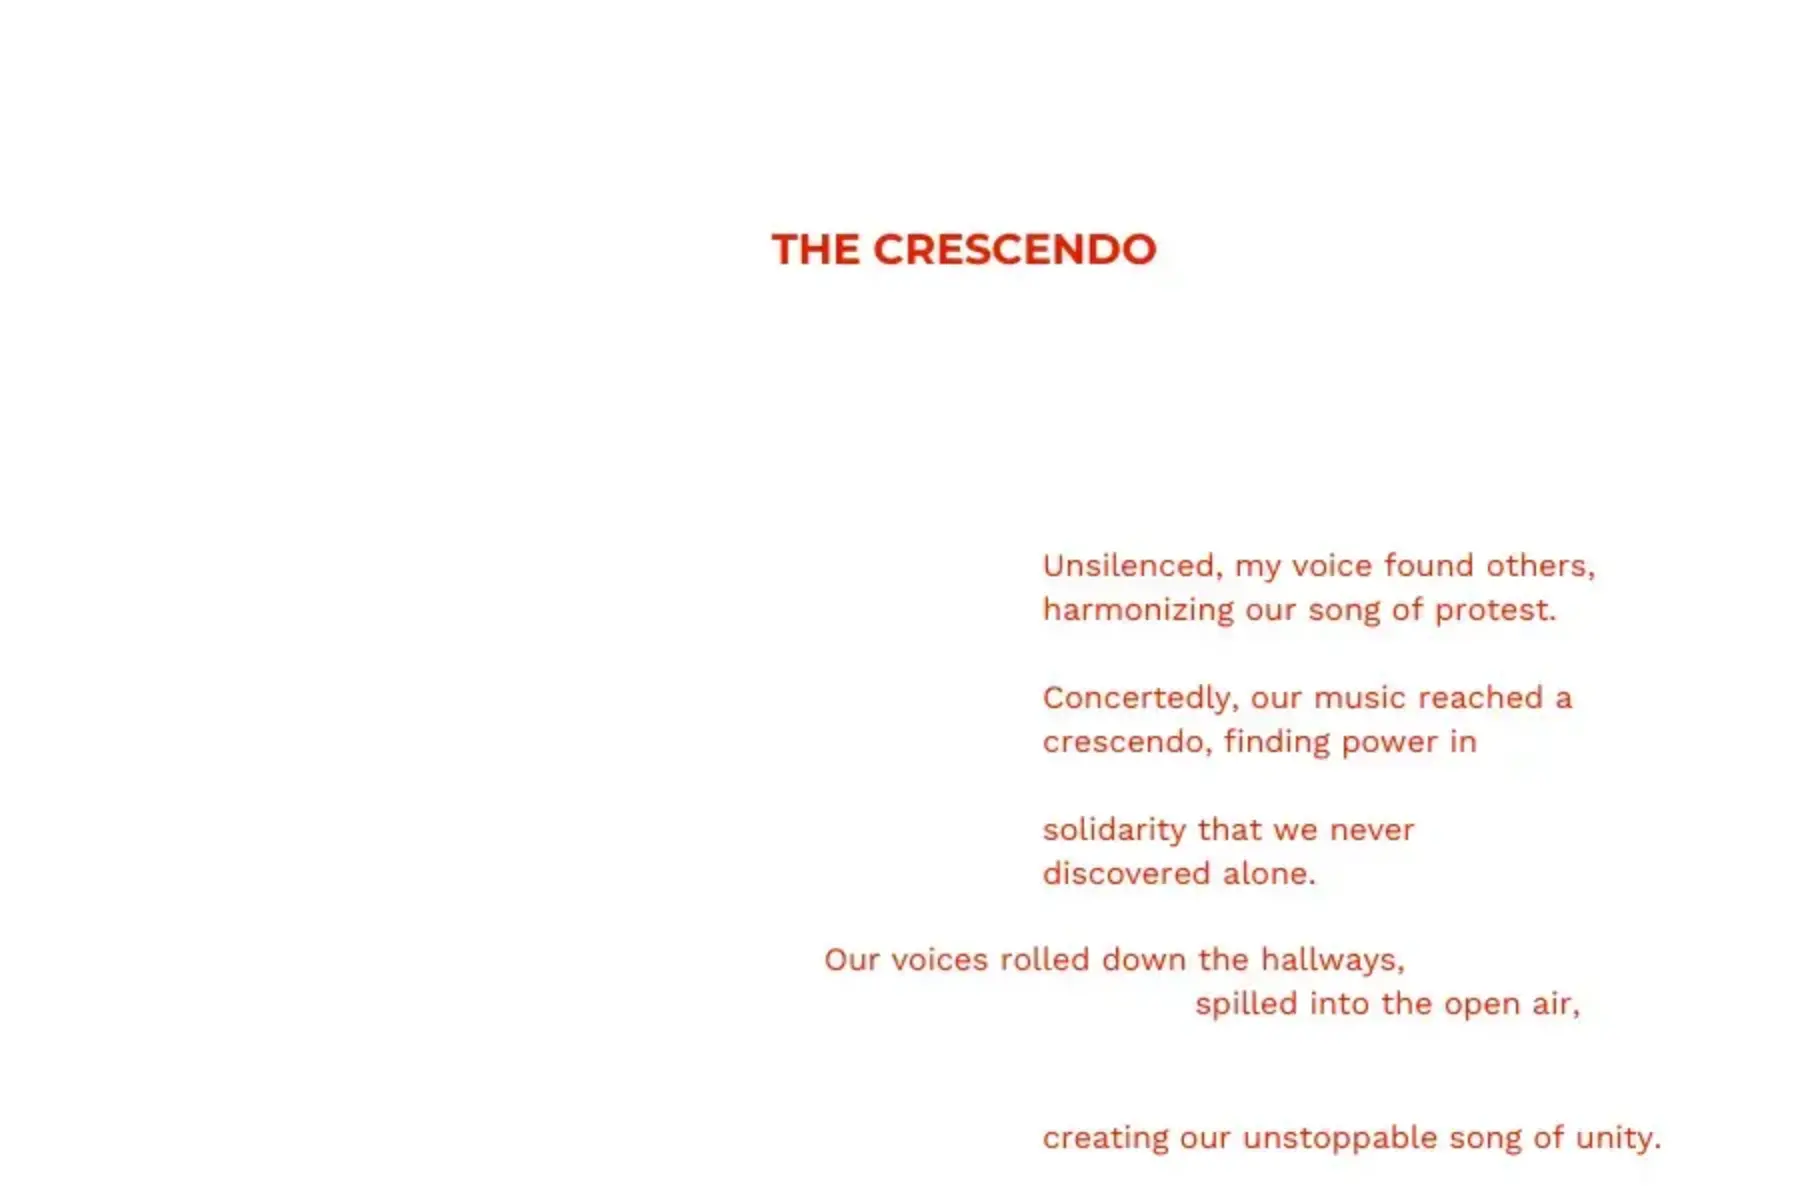 White background with red text that reads The Crescendo Unsilenced, my voice found others, harmonizing our song of protest. Concertedly, our music reached a crescendo, finding power in solidarity that we never discovered alone. Our voices rolled down the hallways, spilled into the open air, creating our unstoppable song of unity.